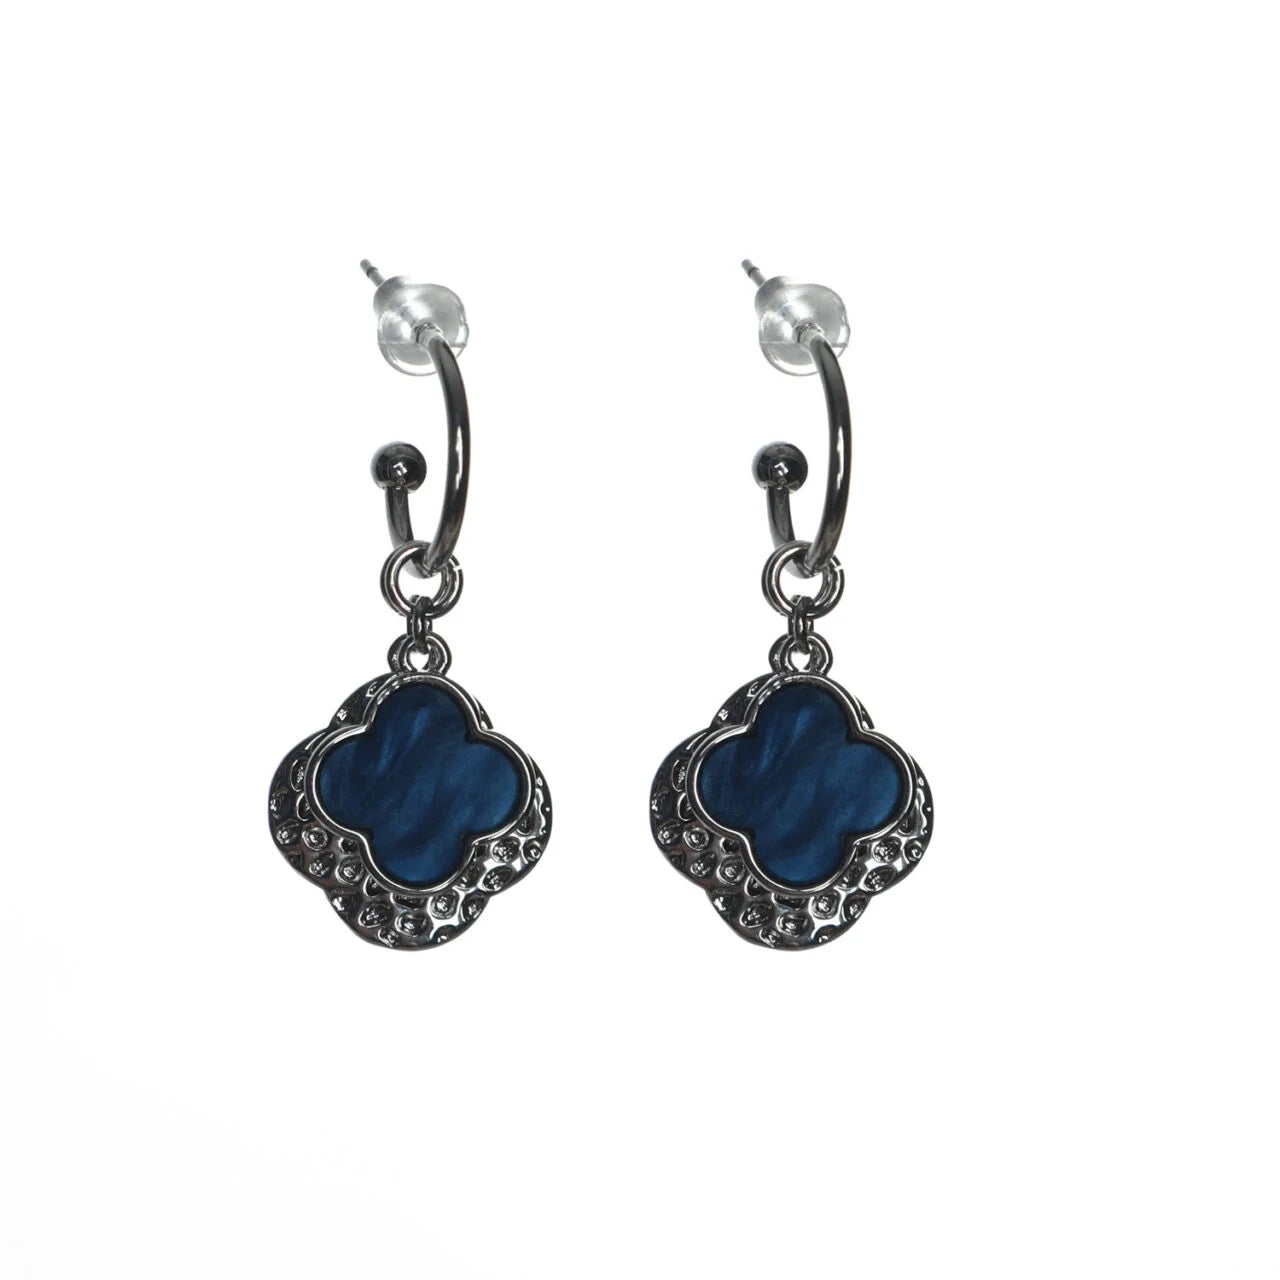 Fabulous Gifts Jewellery Earrings Double Clover Navy Silver by Weirs of Baggot Street